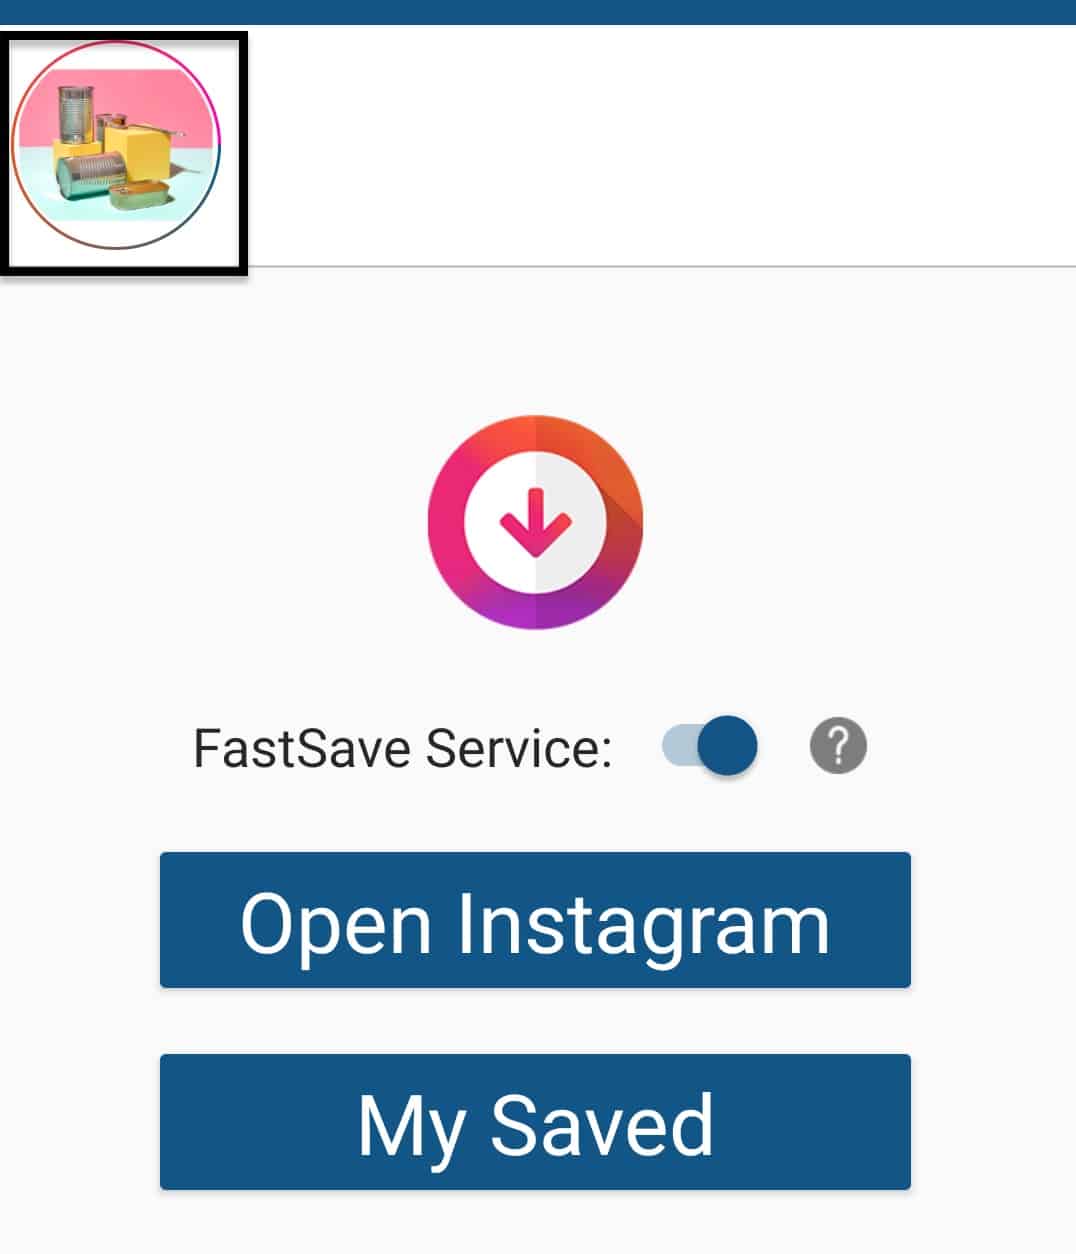 How to easily download images from Instagram to your Android device